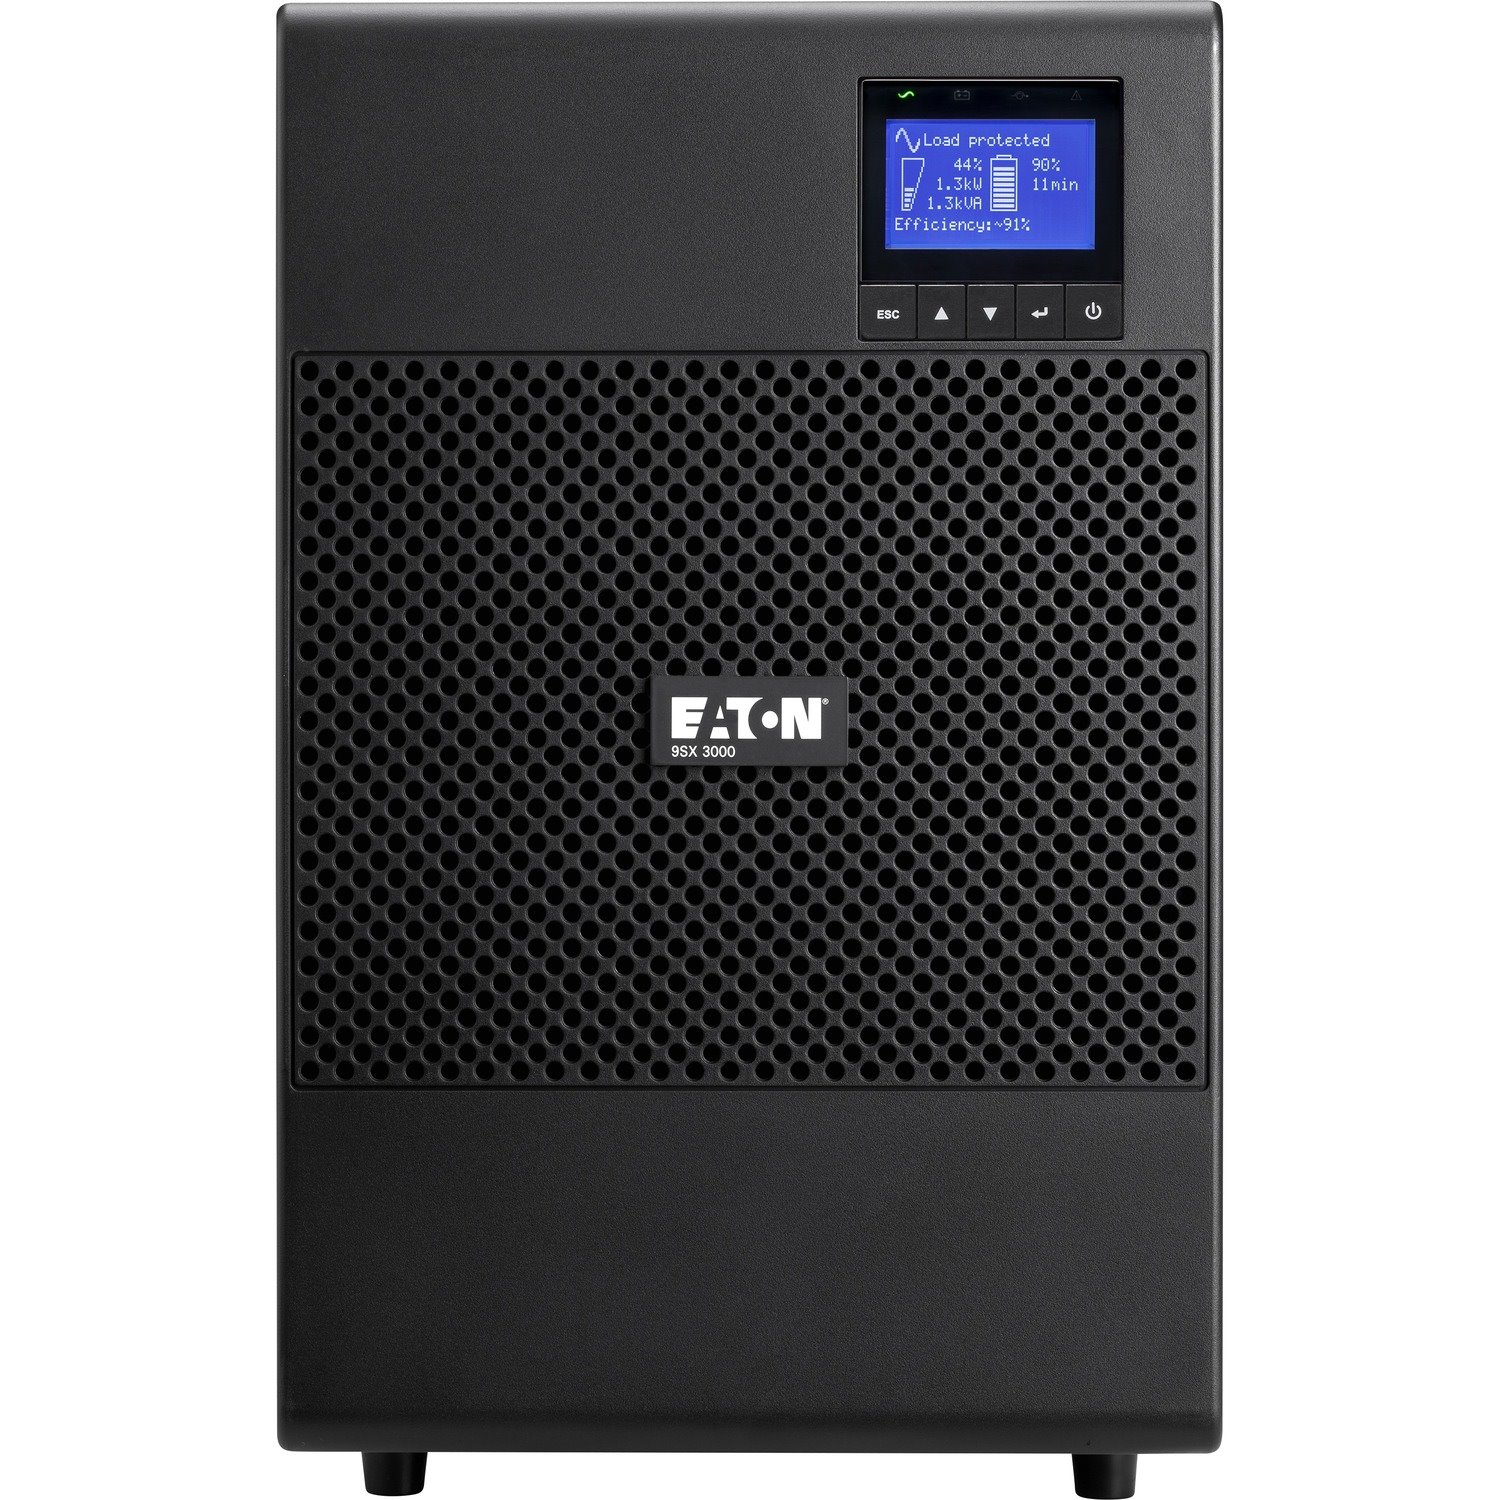 Eaton 9SX 3000VA 2700W 208V Online Double-Conversion UPS - 8 C13, 1 C19 Outlets, Cybersecure Network Card Option, Extended Run, Tower - Battery Backup